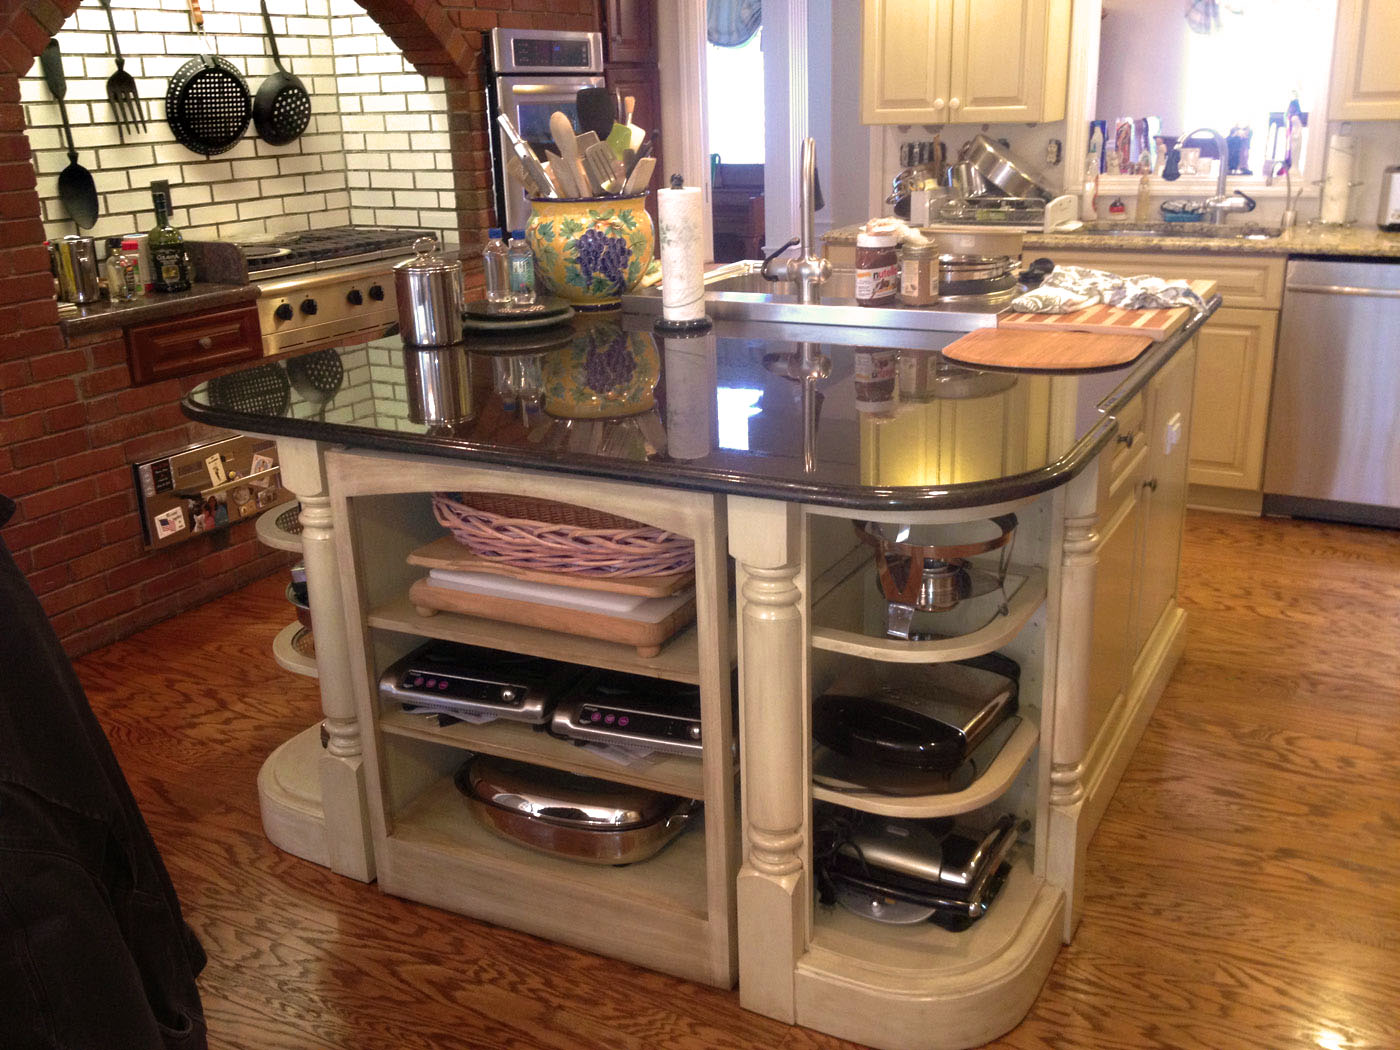 Pre-Built Kitchen Cabinets with Flair - Craftworks Custom Cabinetry